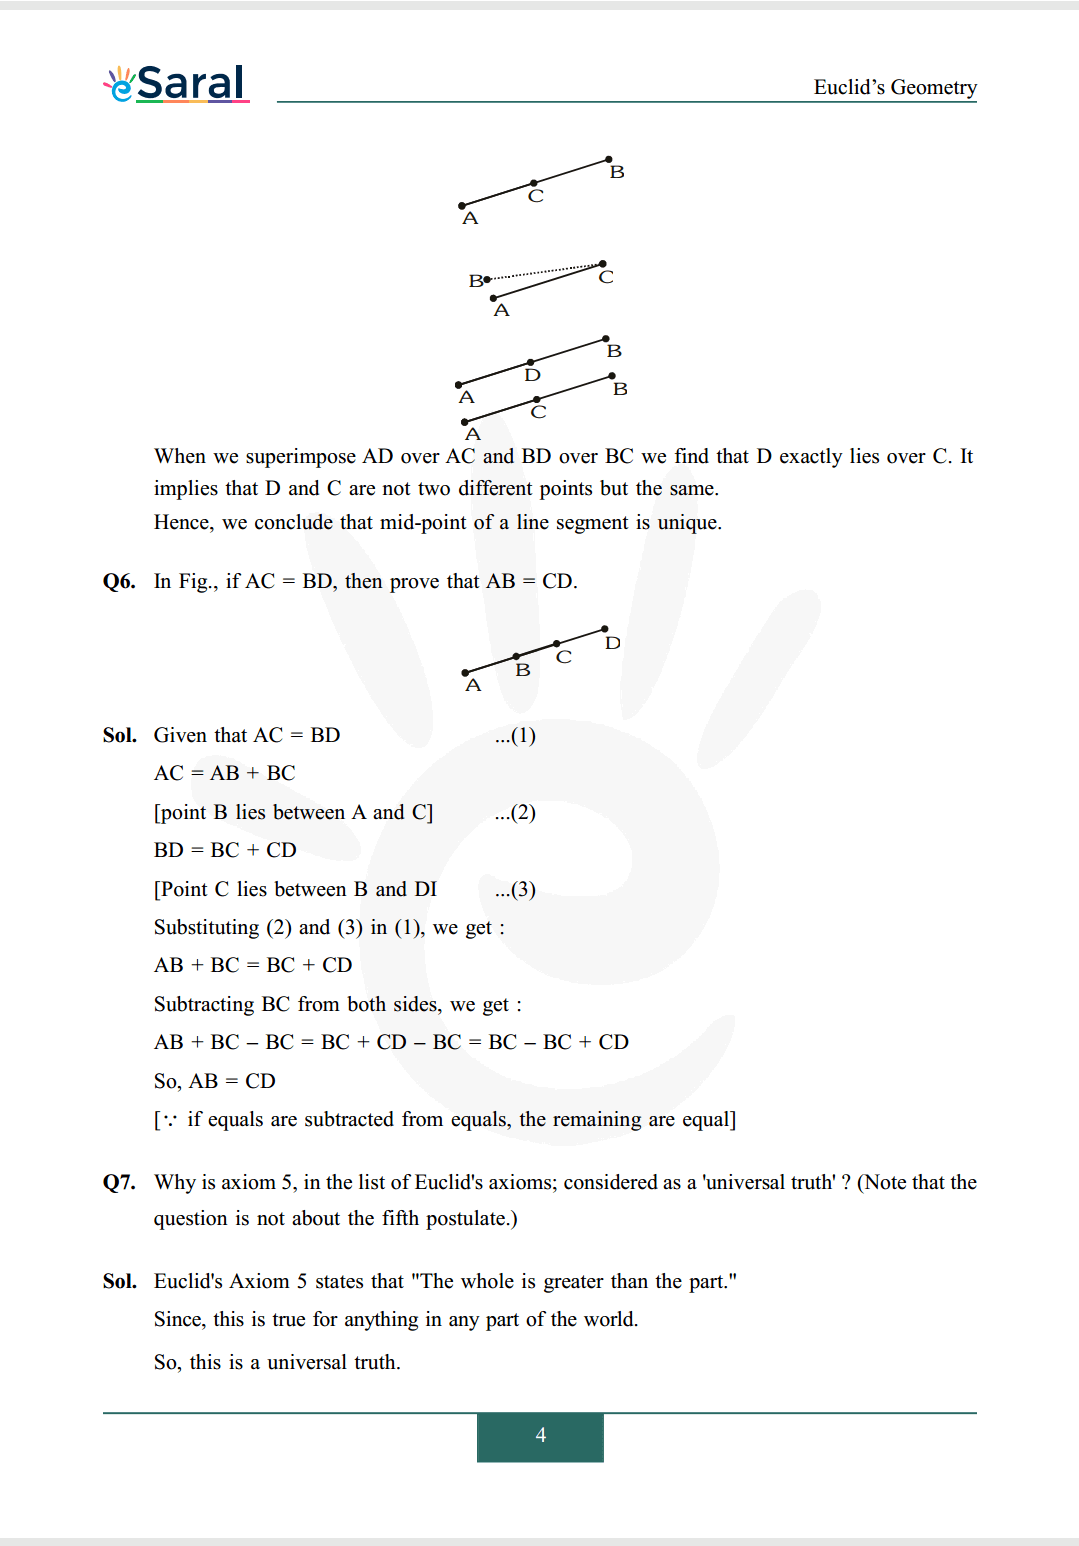 Class 9 maths chapter 5 exercise 5.1 solutions Image 4